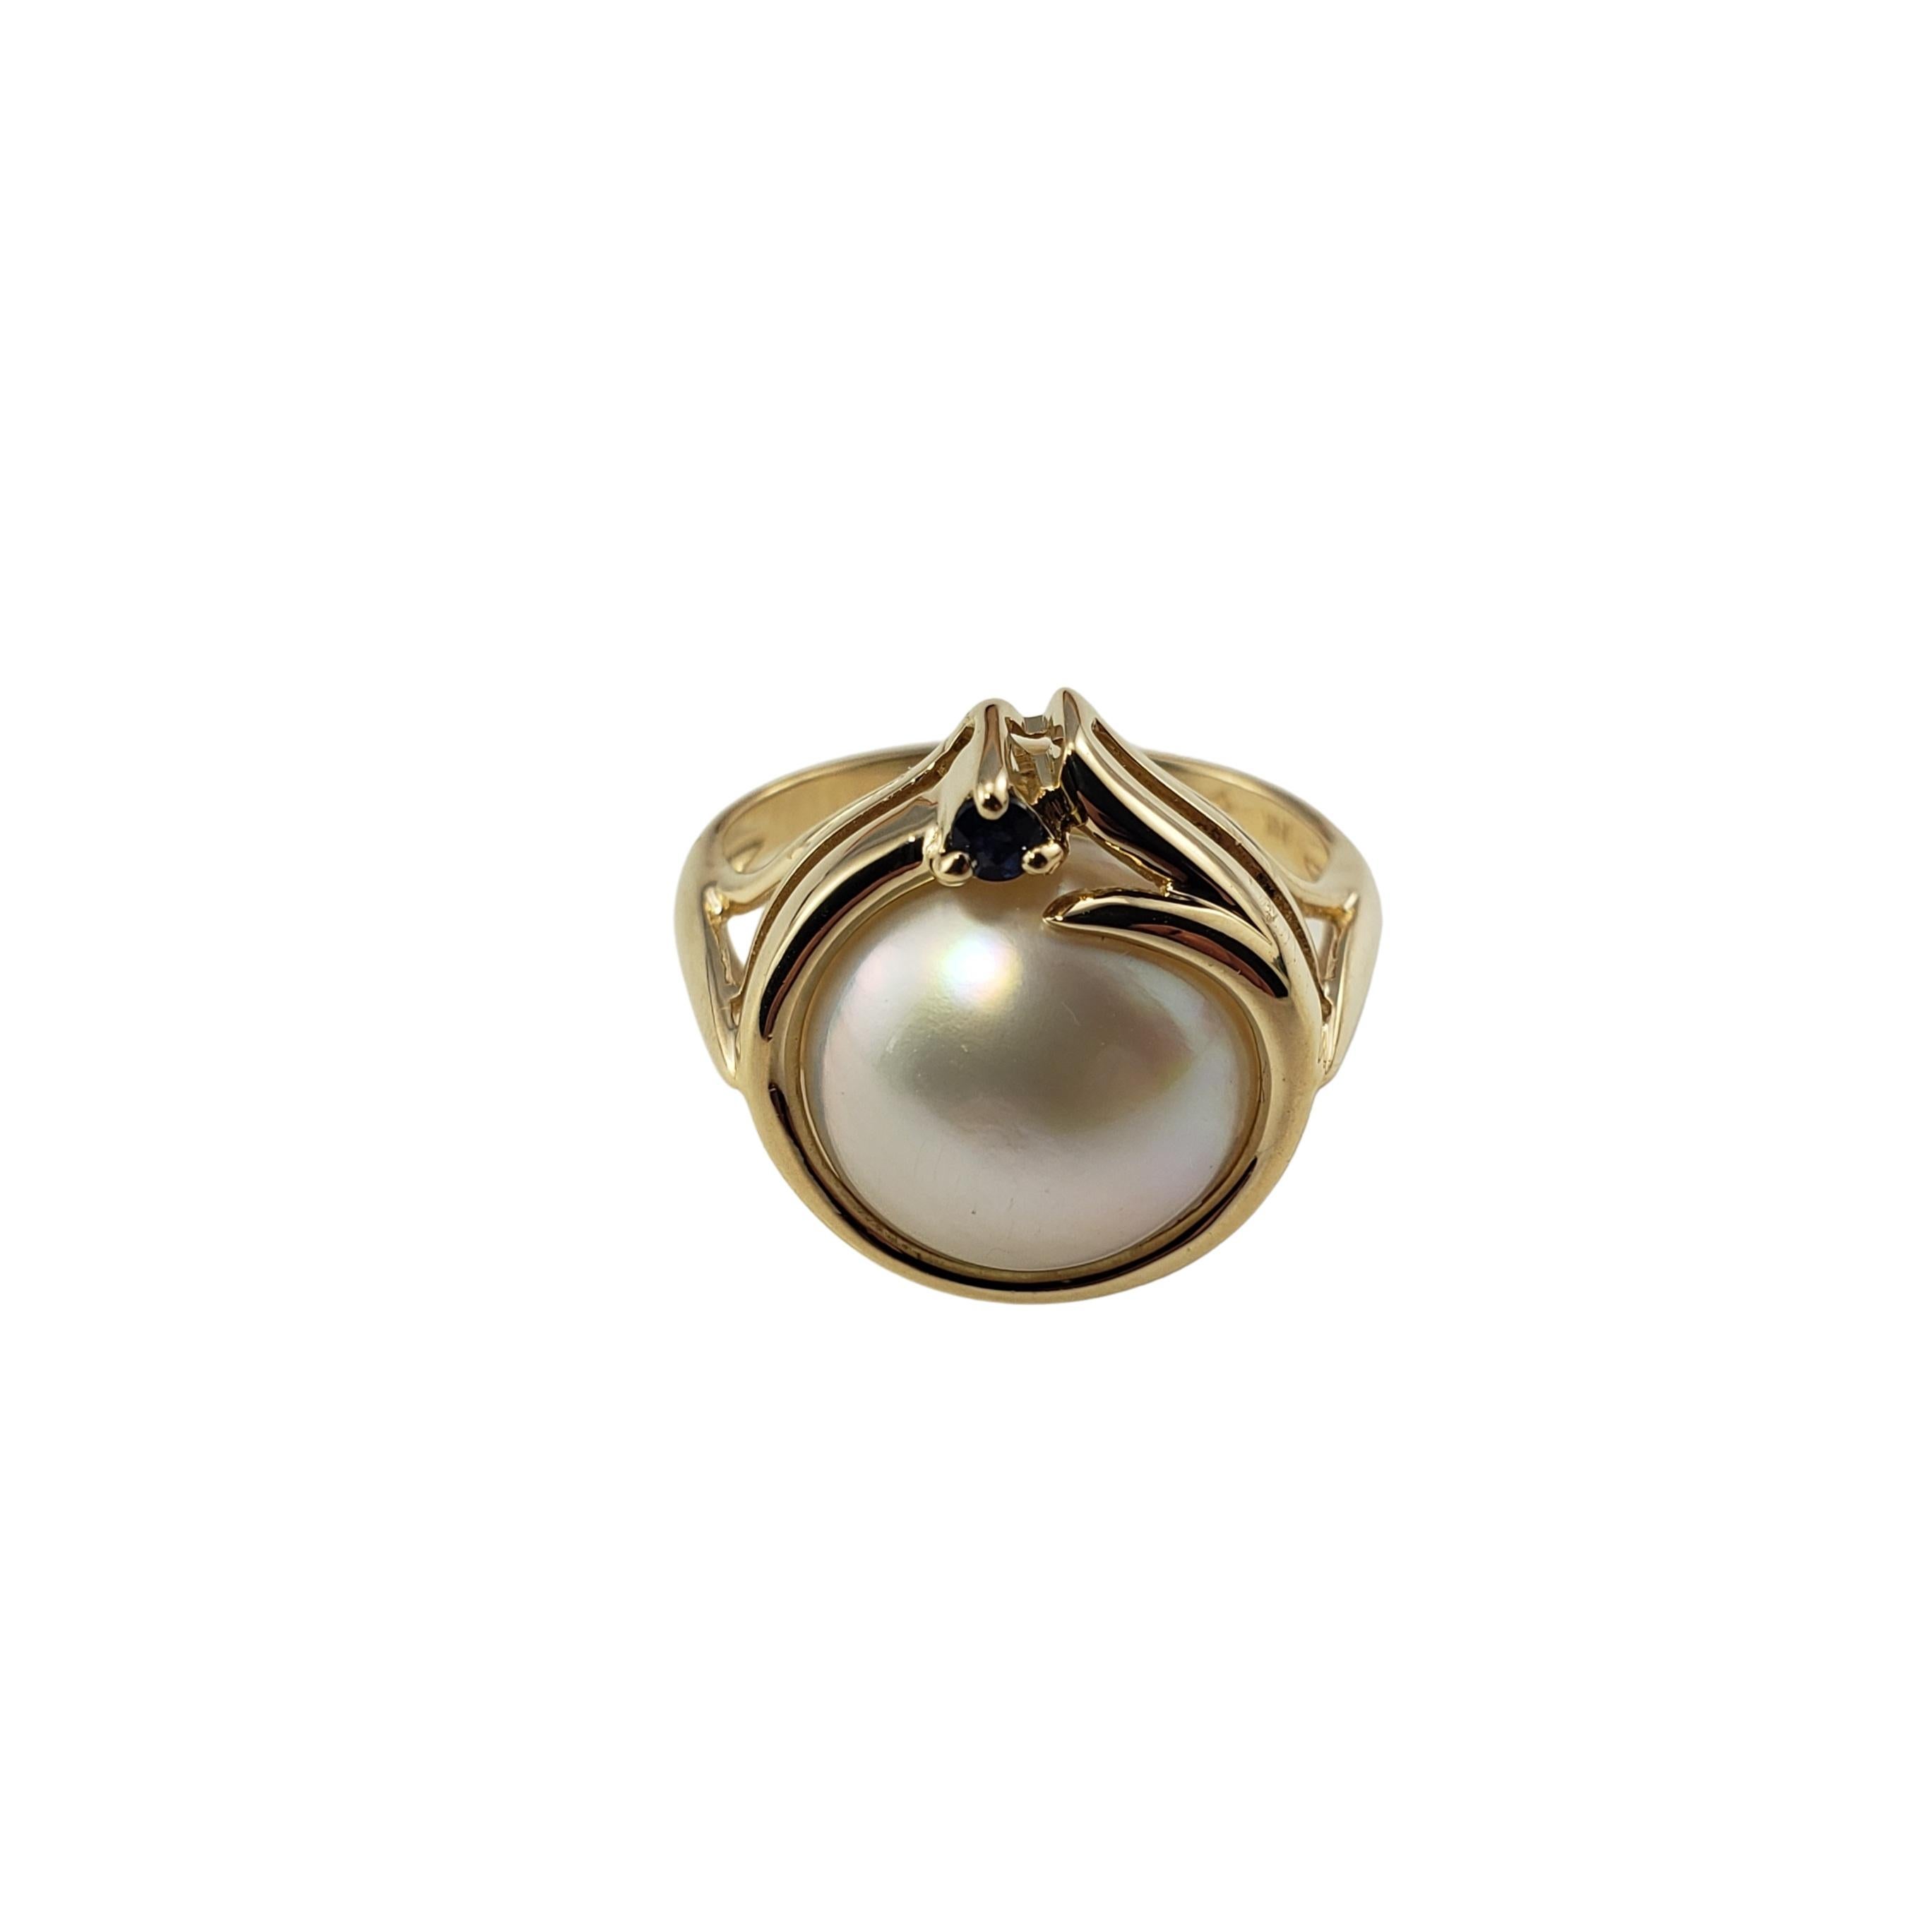 Vintage 14 Karat Yellow Gold Mabe Pearl and Sapphire Ring Size 7-

This lovely ring features one Mabe pearl (11 mm) and one round sapphire set in classic 14K yellow gold.

Shank: 2 mm

Size:  7

Weight:  3.0 dwt. /  4.7 gr.

Stamped:  14K

Very good